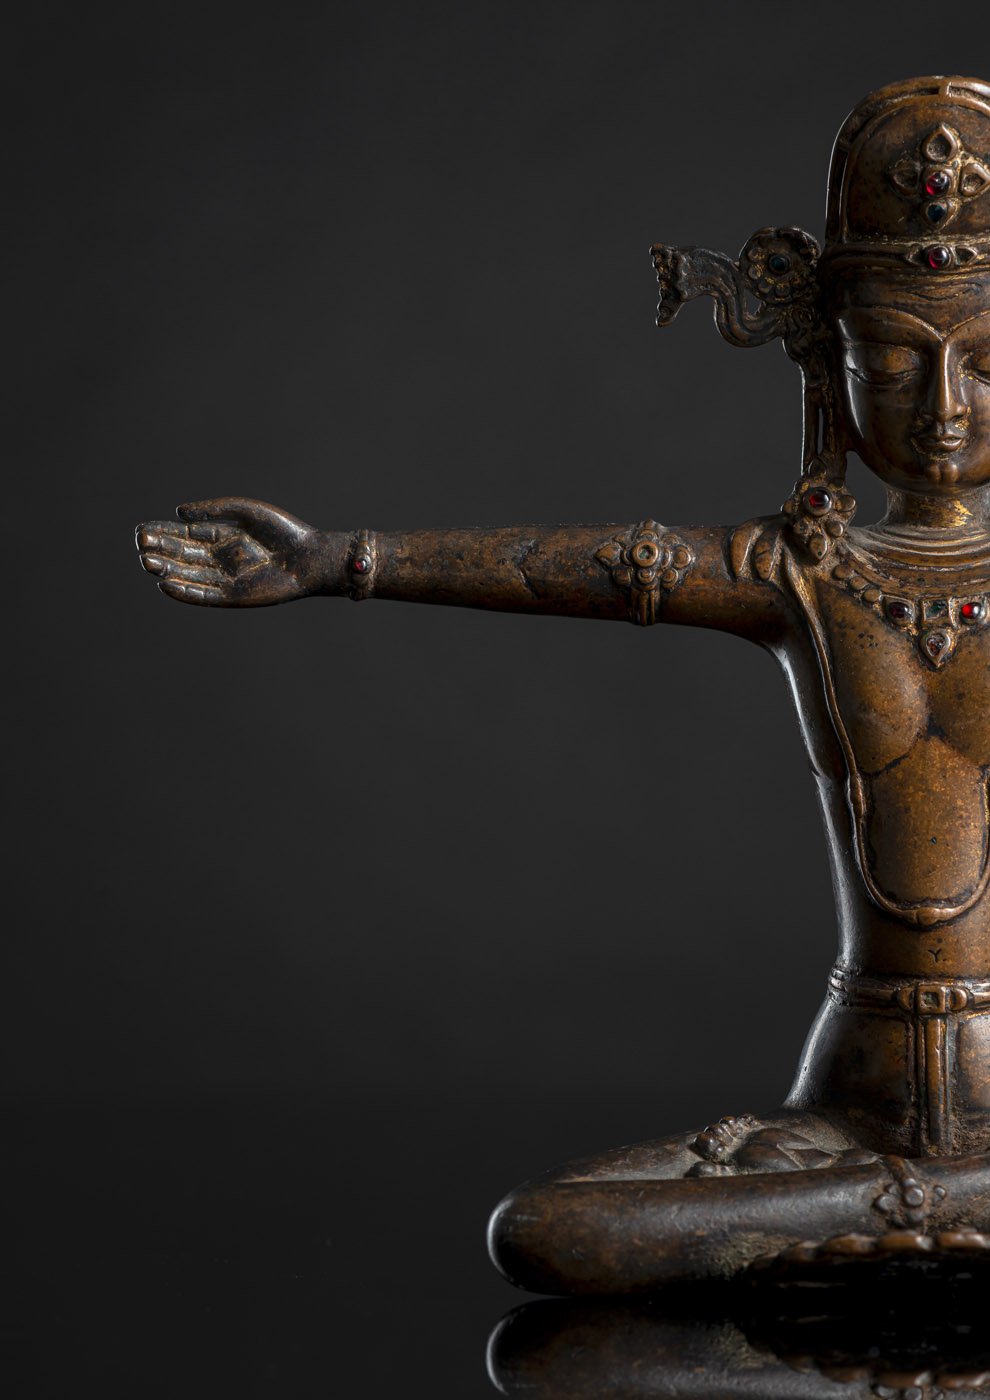 AN EXTREMELY RARE AND IMPORTANT BRONZE FIGURE OF INDRA IN CAPTIVITY - Image 7 of 12